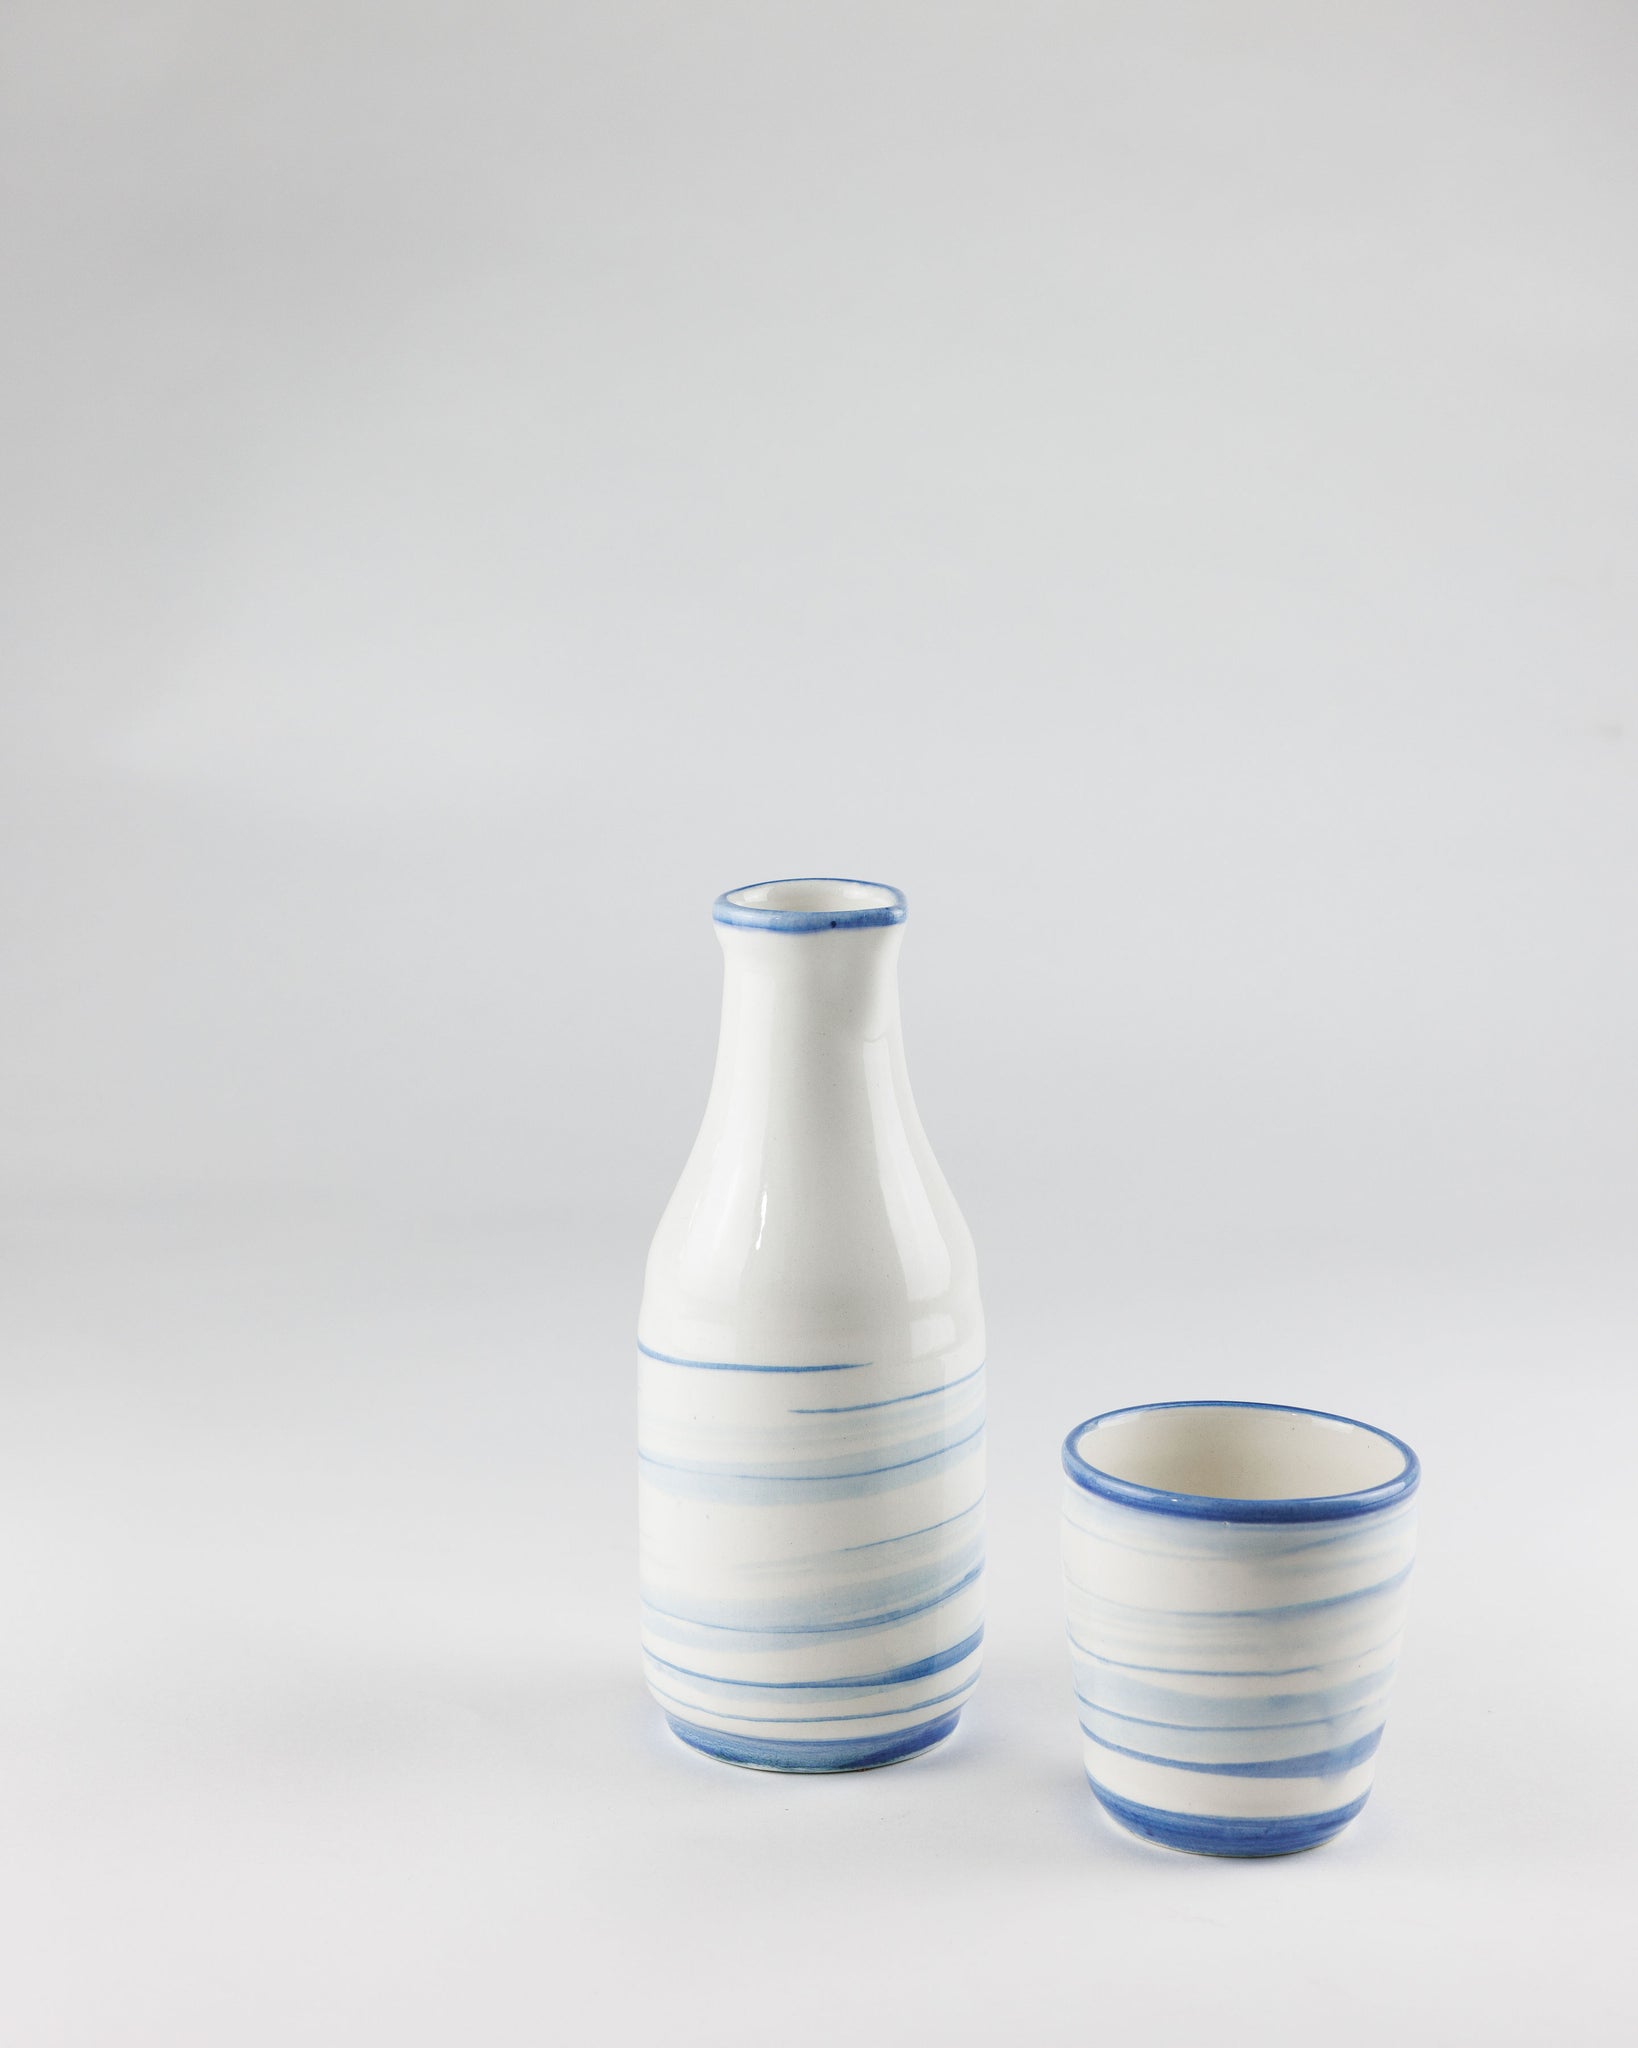 Carafe Set: 1 Carafe + 2 Cups matching white and blue details